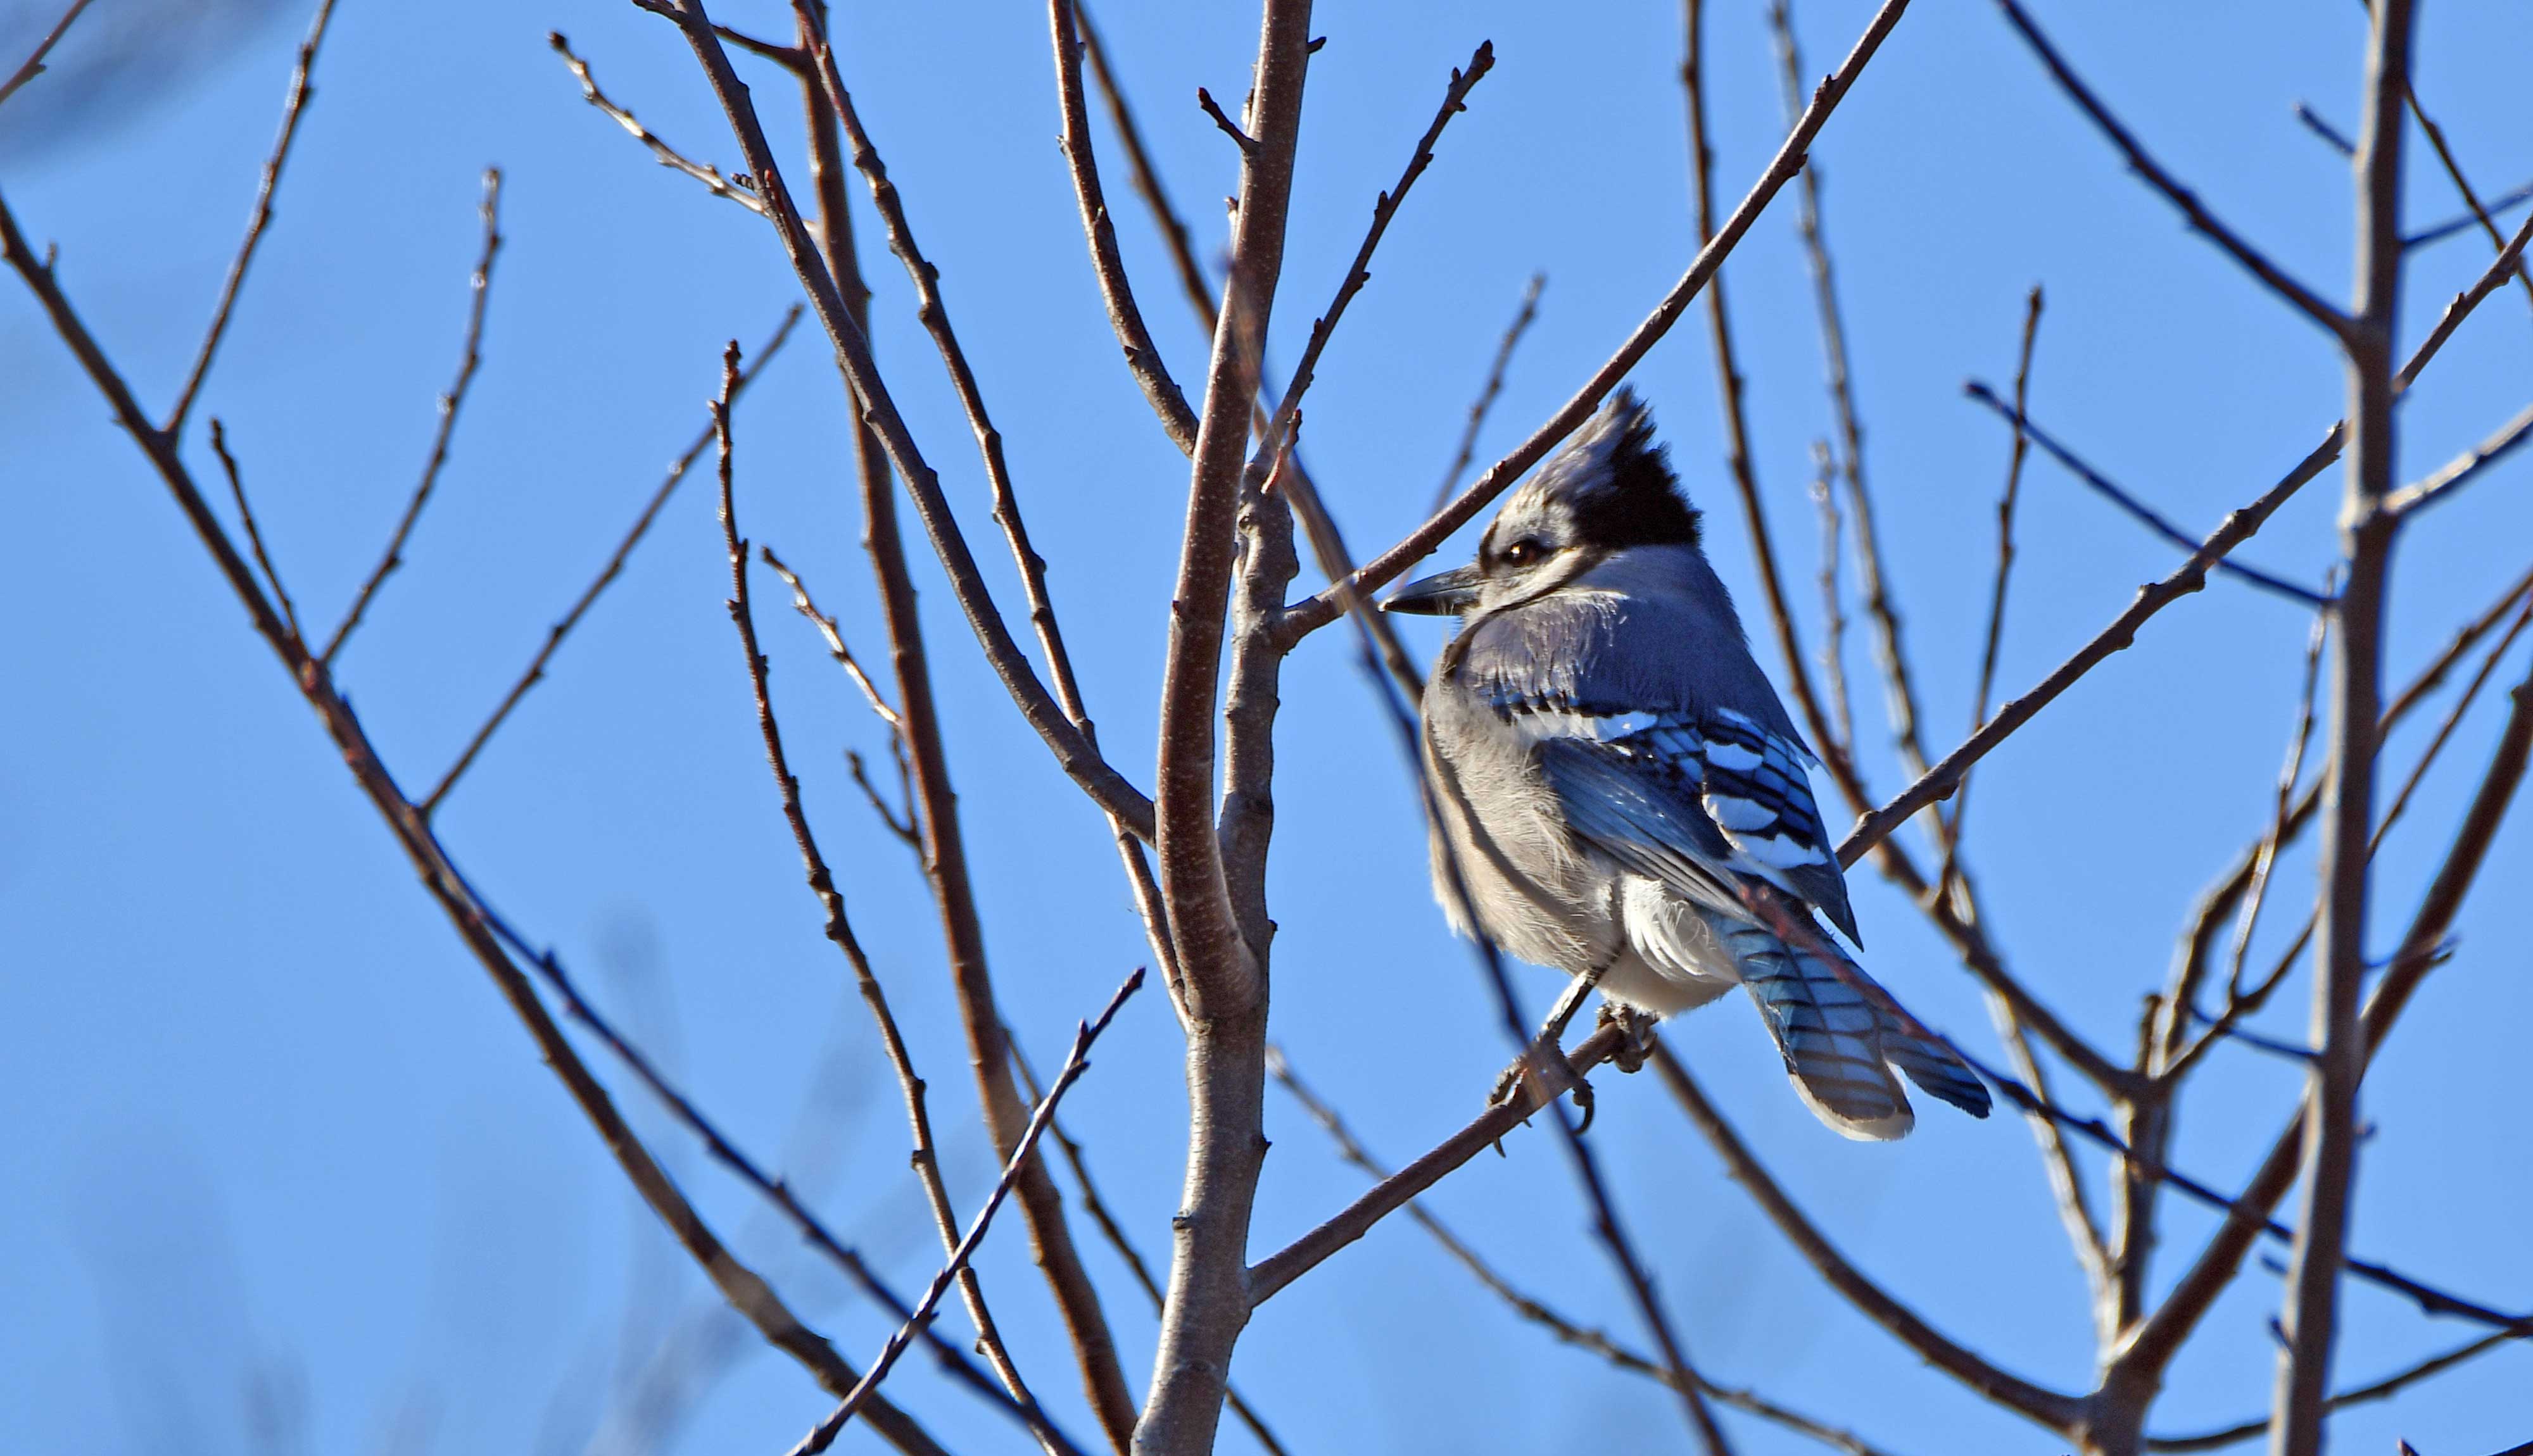 A blue jay in a tree.